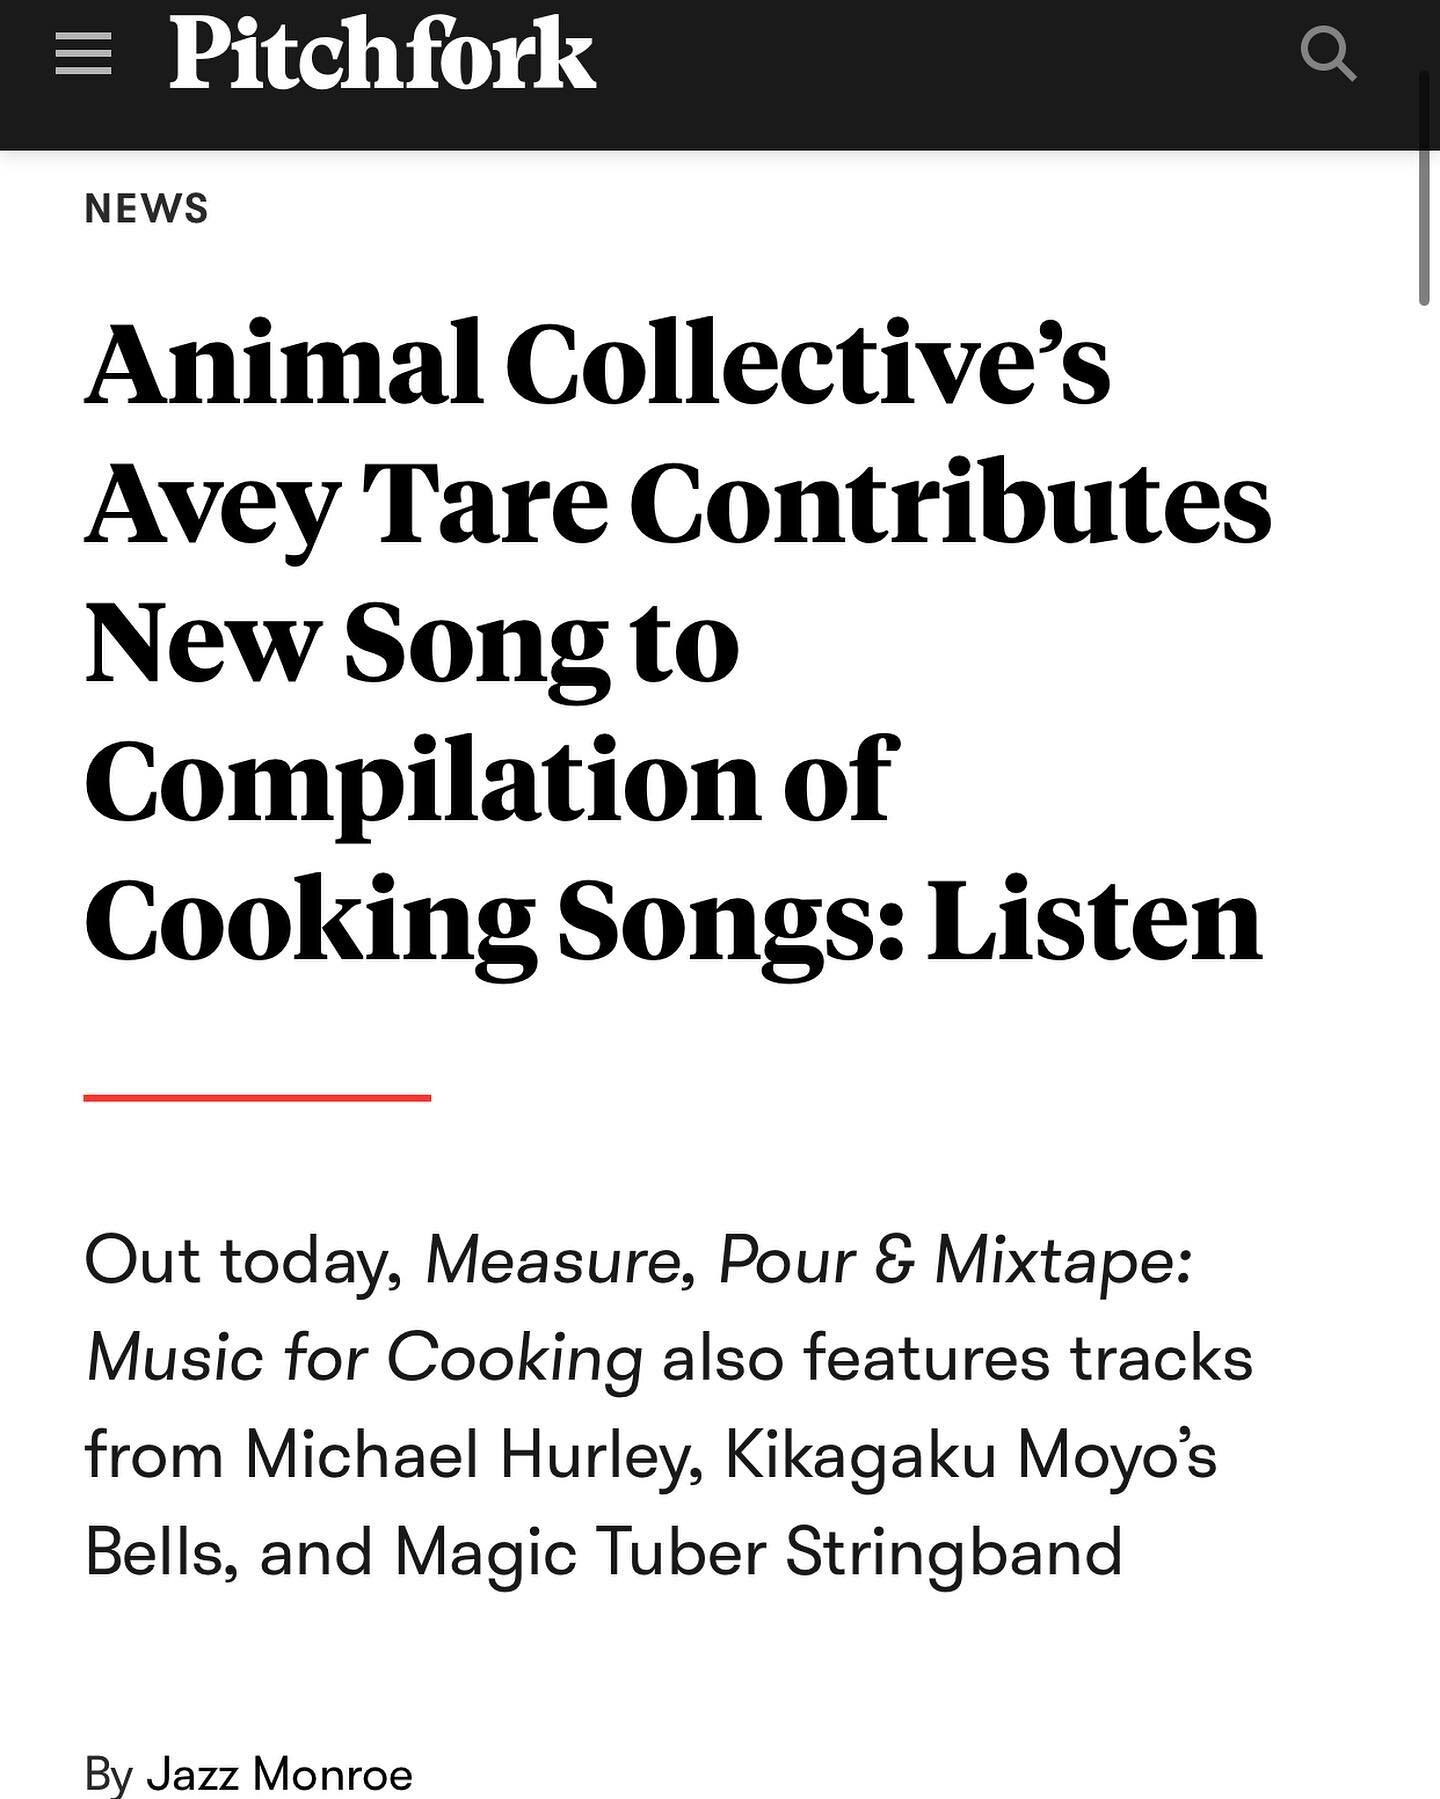 Thanks, @pitchfork! Come for the tabbouleh, stay for the grains, apples, browned butter, hoppin&rsquo; john, crab boil, cooked fish, baked pie, and chocolate beet cake sonic feast 🍽️🦀🫘🧀🍇🌽🍅🥧

Get your copy of MEASURE, POUR &amp; MIXTAPE: MUSIC